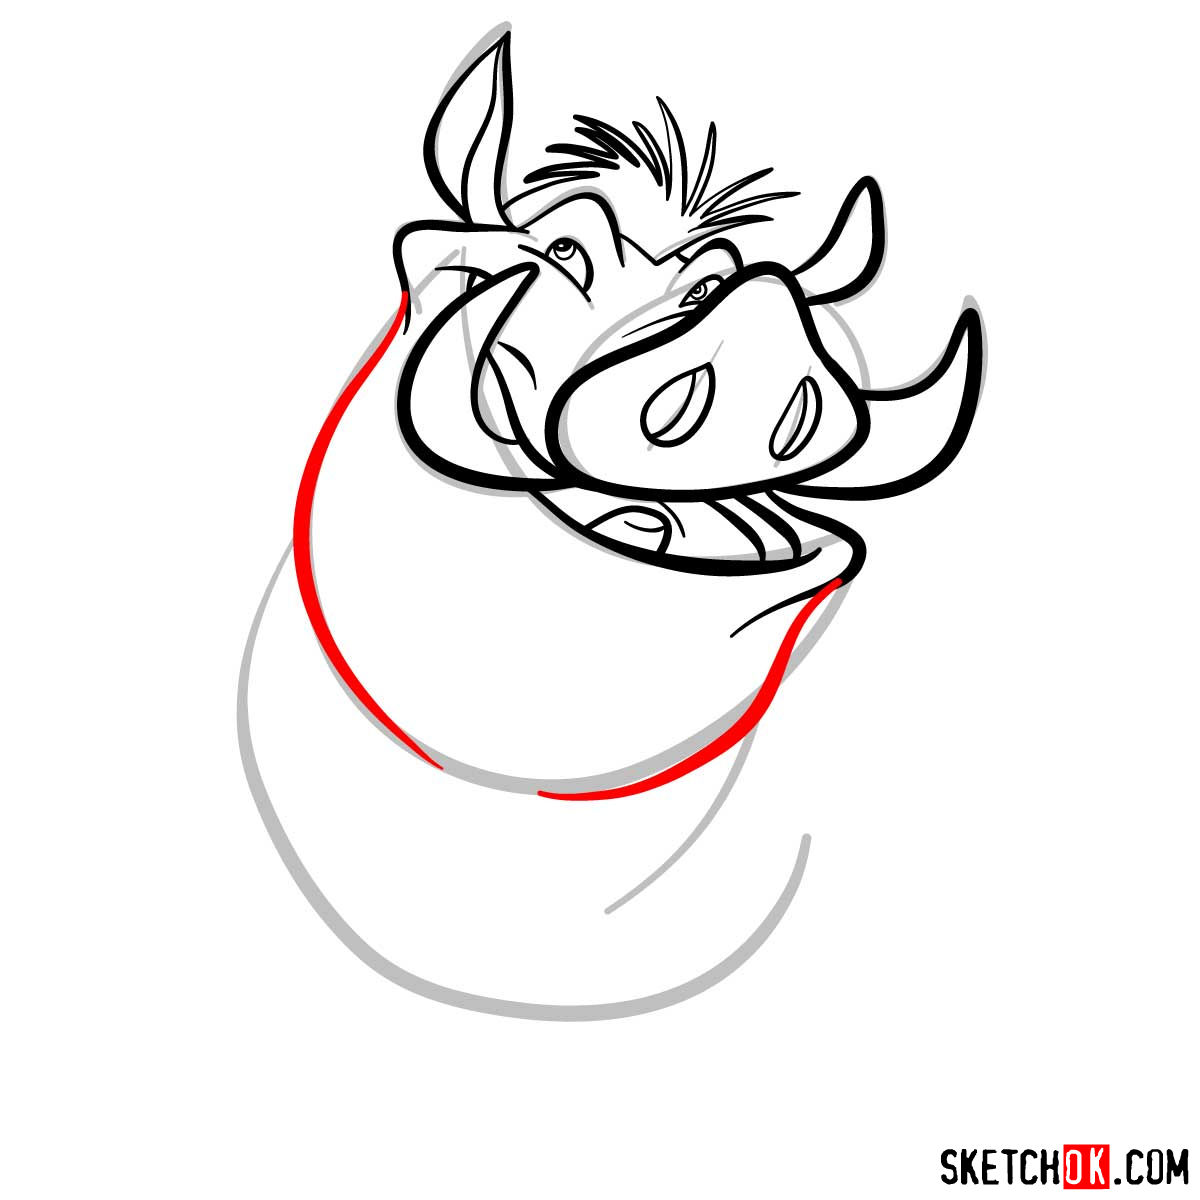 How to draw Pumbaa | The Lion King - Sketchok easy drawing guides